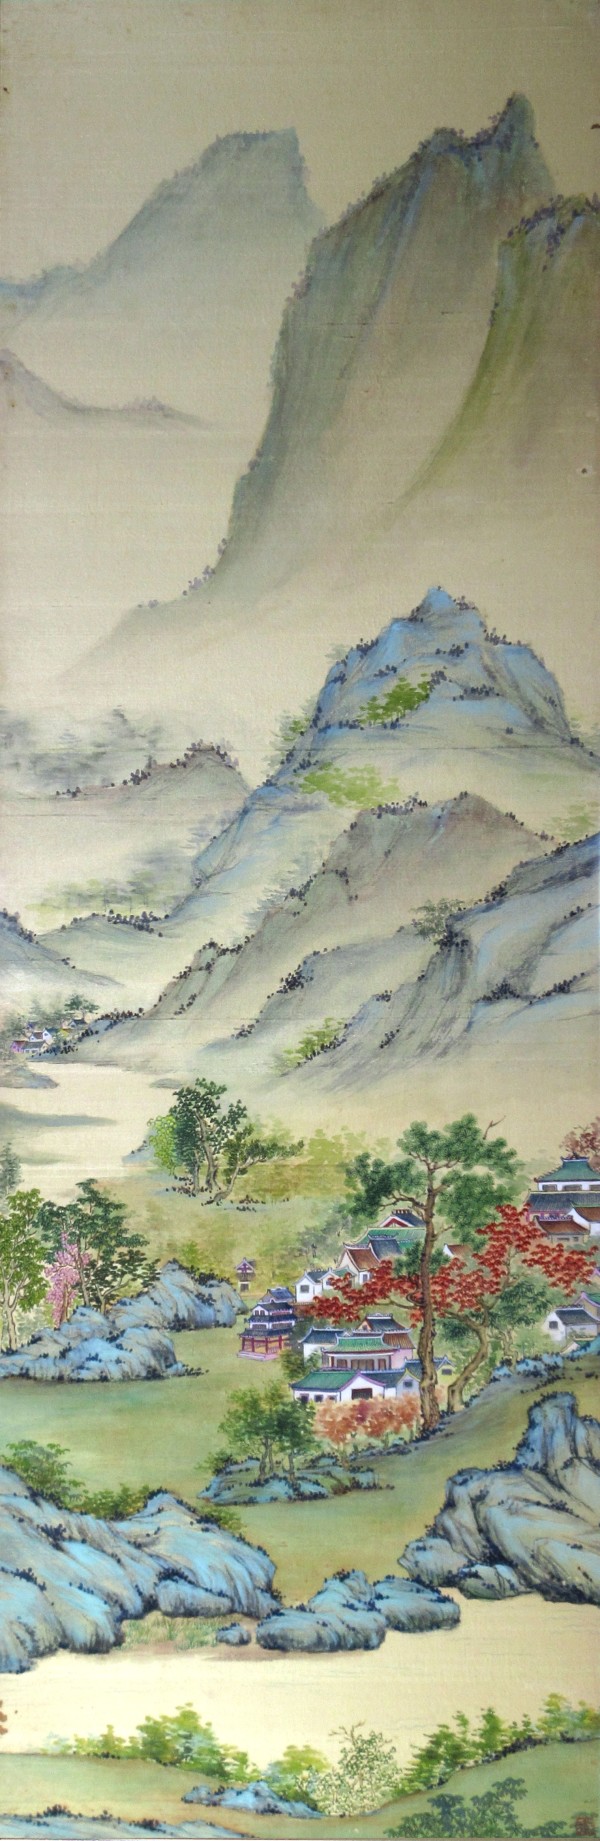 Landscape Panel 2 of 4 by Yee Wah Jung Attributed